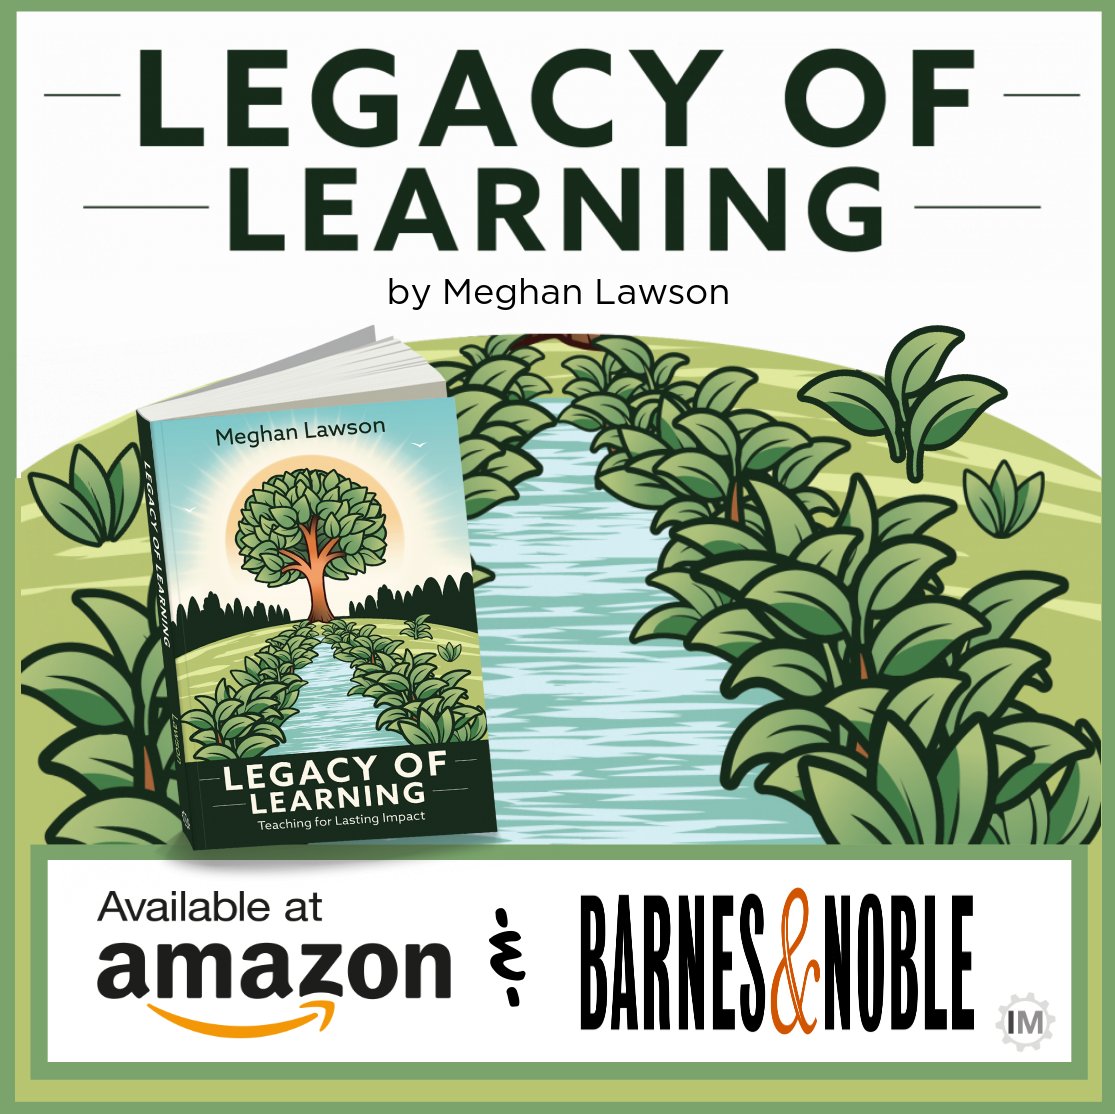 This book by Meghan Lawson... #LegacyOfLearning is 🔥! For REAL! Learn MORE Right HERE: 📖 amazon.com/Legacy-Learnin… #tlap #dbcincbooks @Meghan_Lawson @TaraMartinEDU @burgessdave @dbc_inc @gcouros @PaigeCouros @impress.lp #dbcincbooks